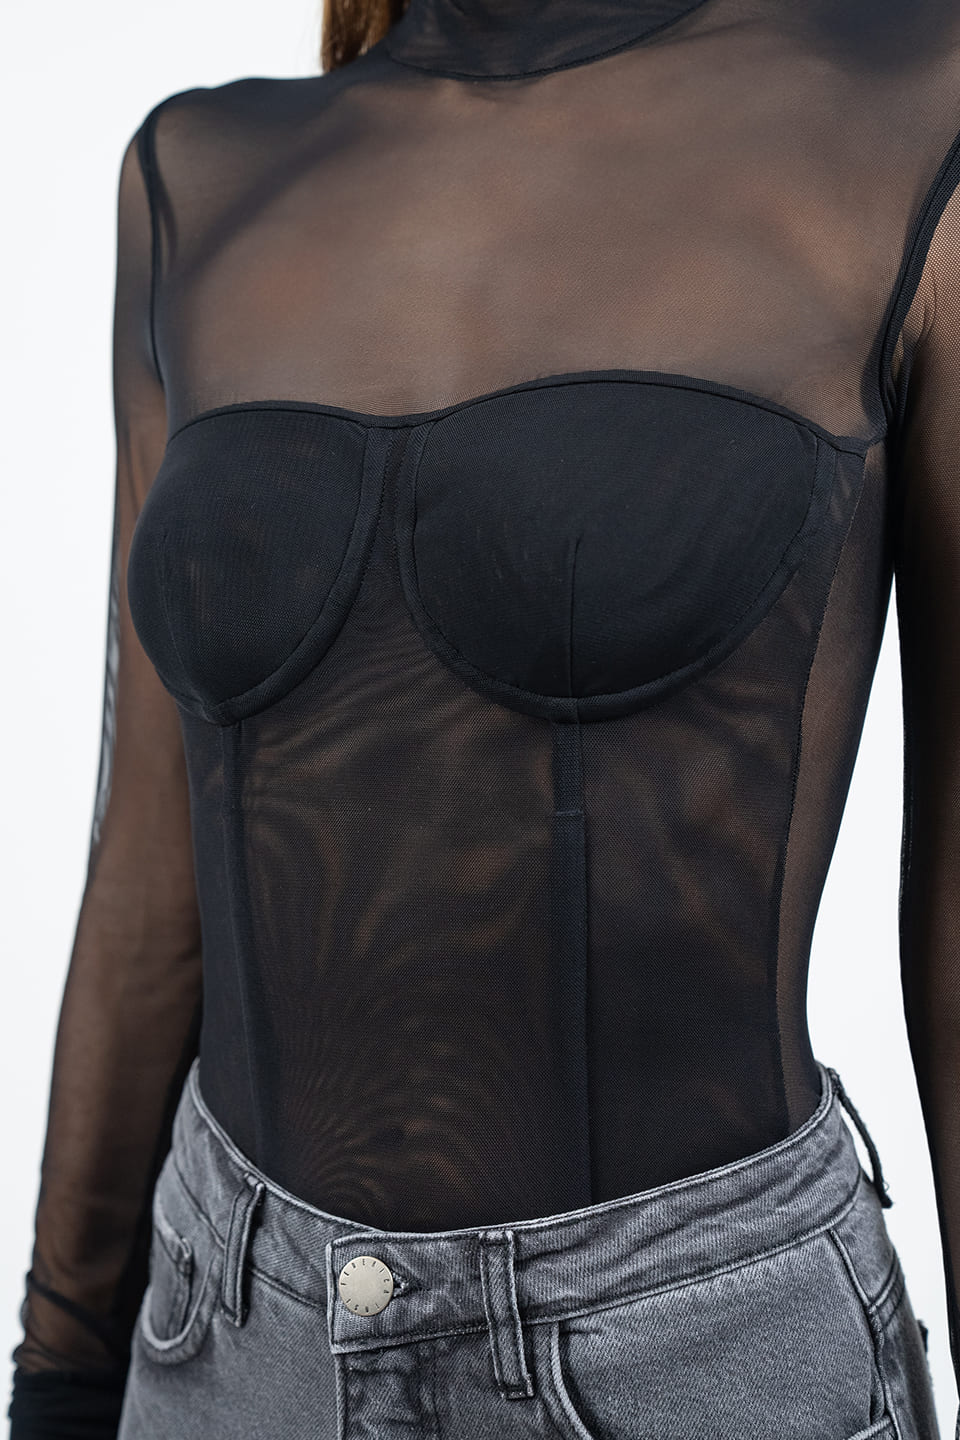 Thumbnail for Product gallery 4, Black Sheer Top